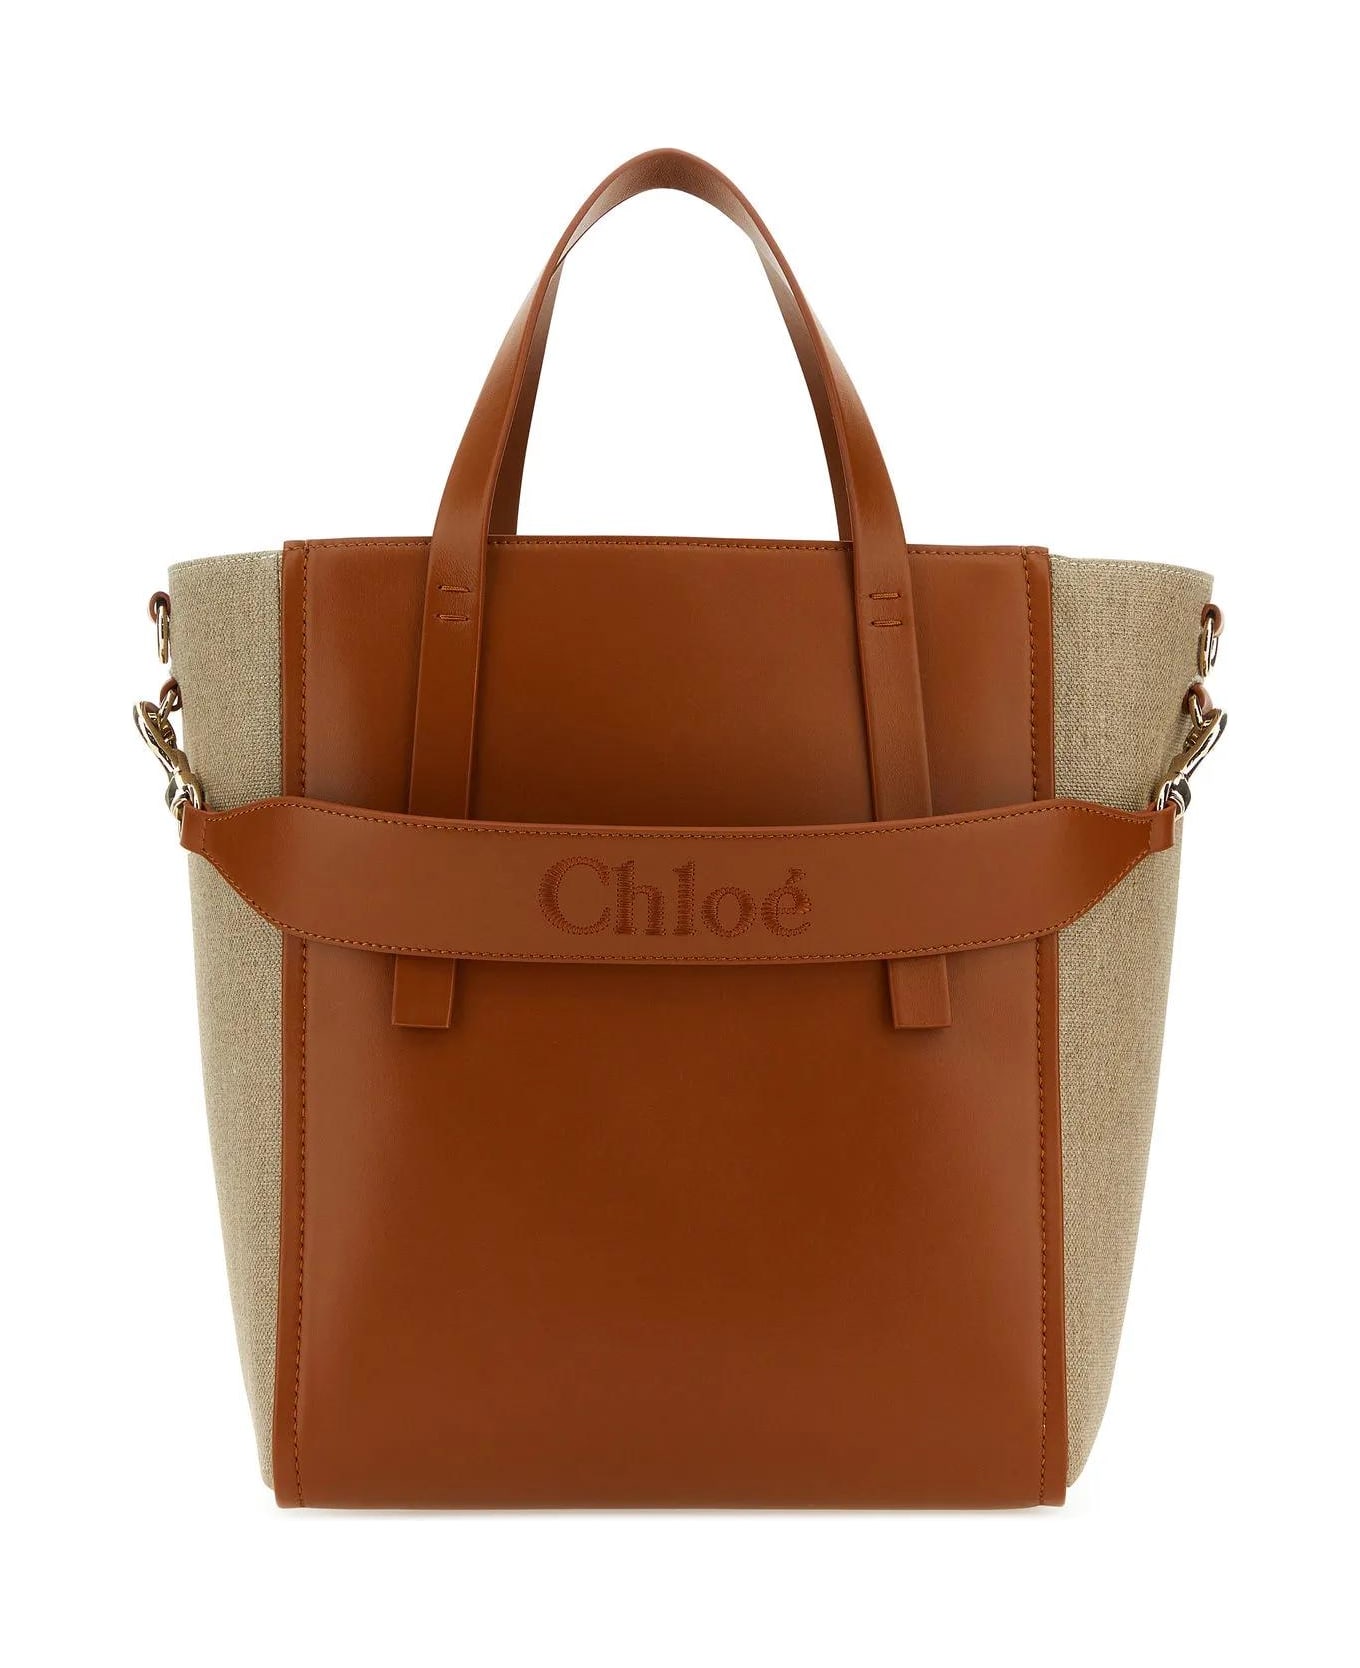 Chloé Two-tone Linen And Leather Medium Sense Shopping Bag - Leather Brown